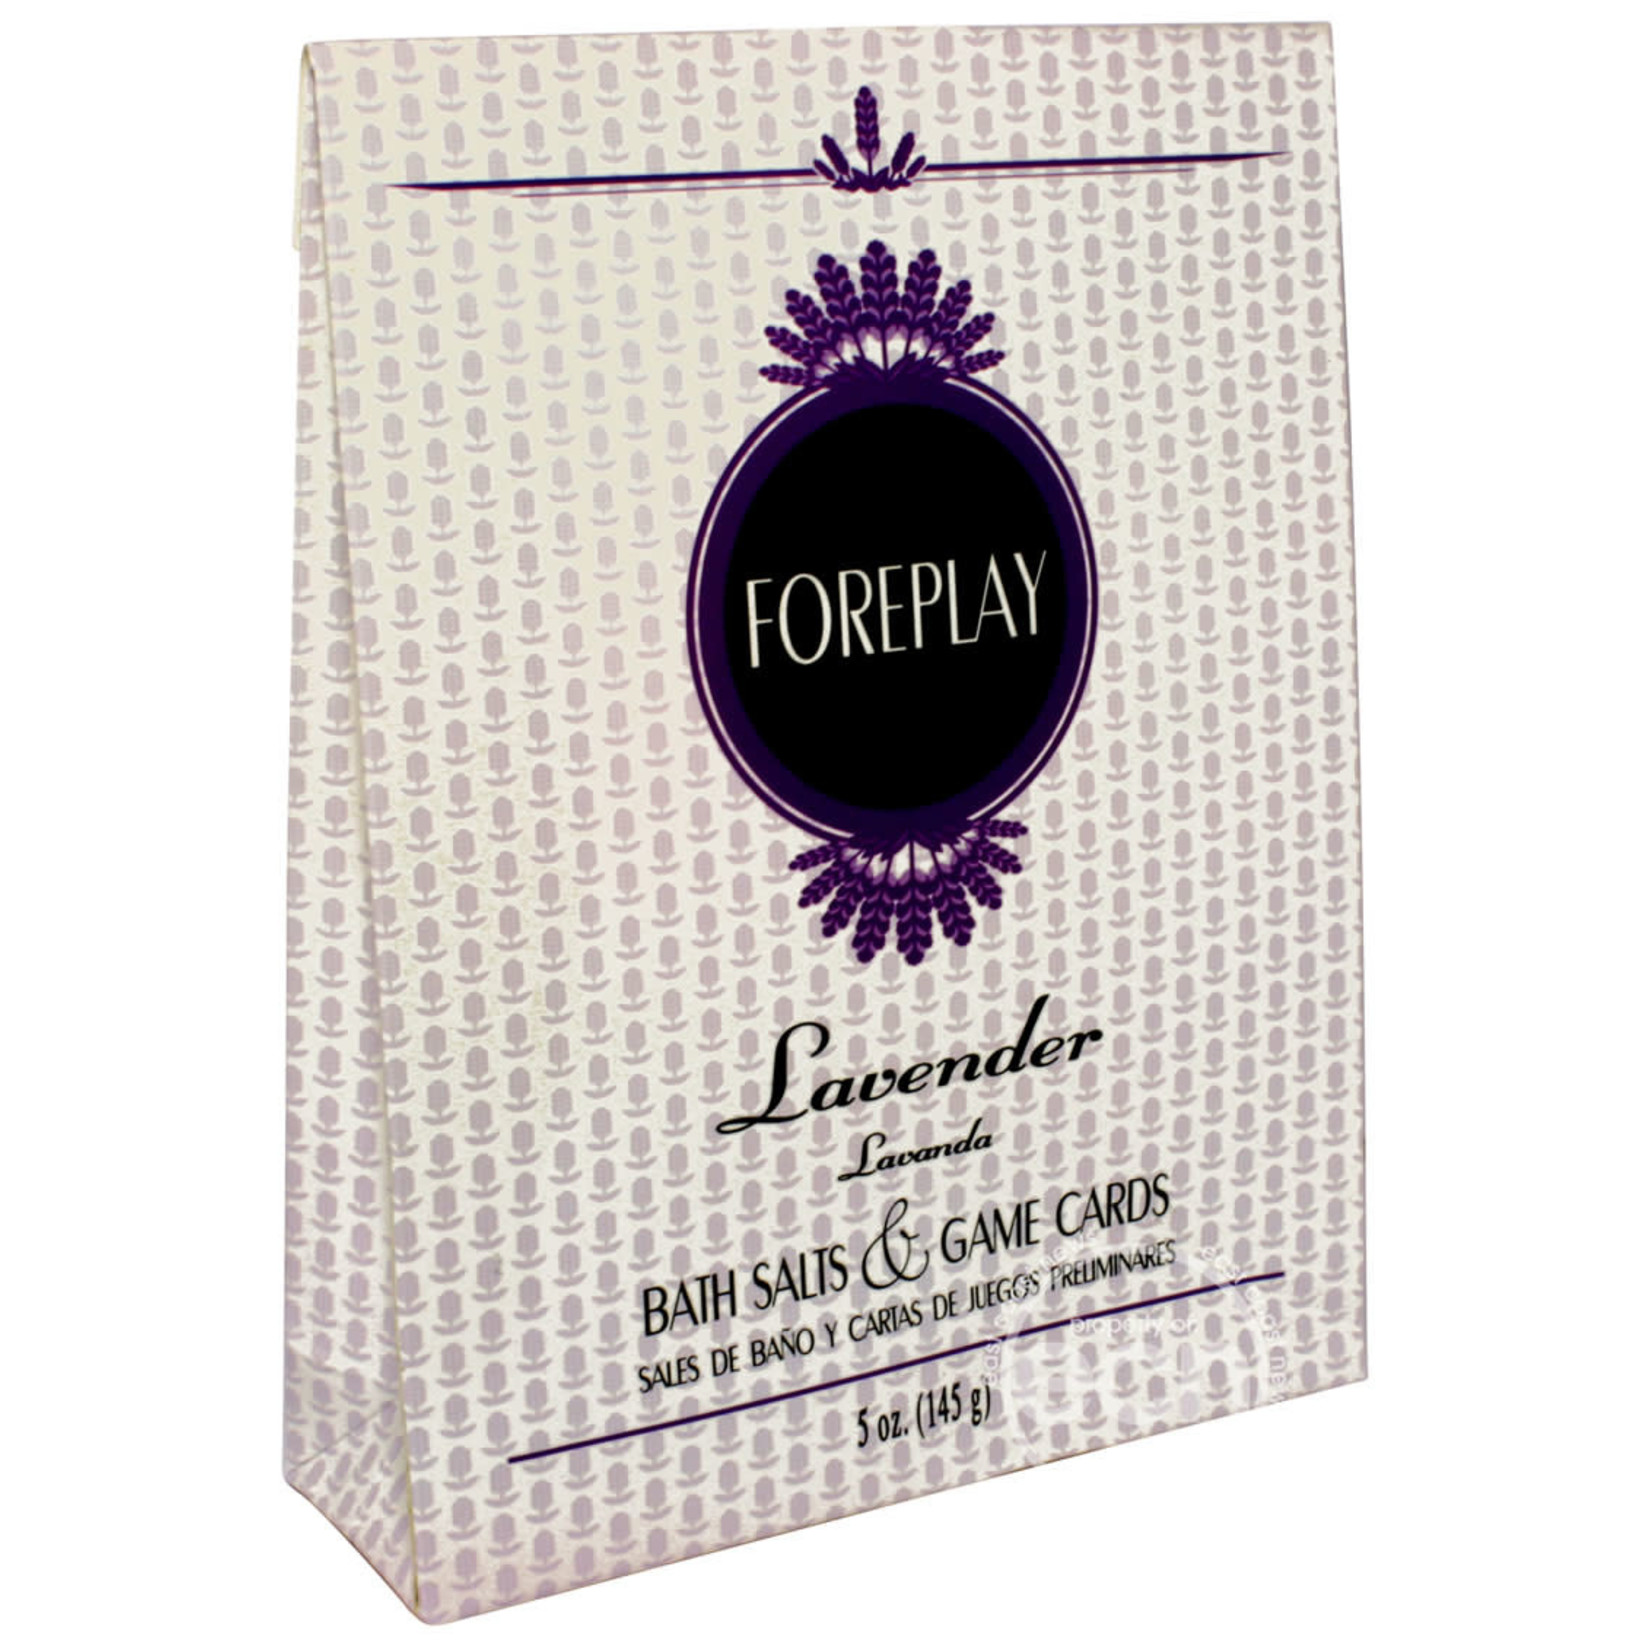 Foreplay Bath Set - Lavender Scented Bath Salts With Game Cards